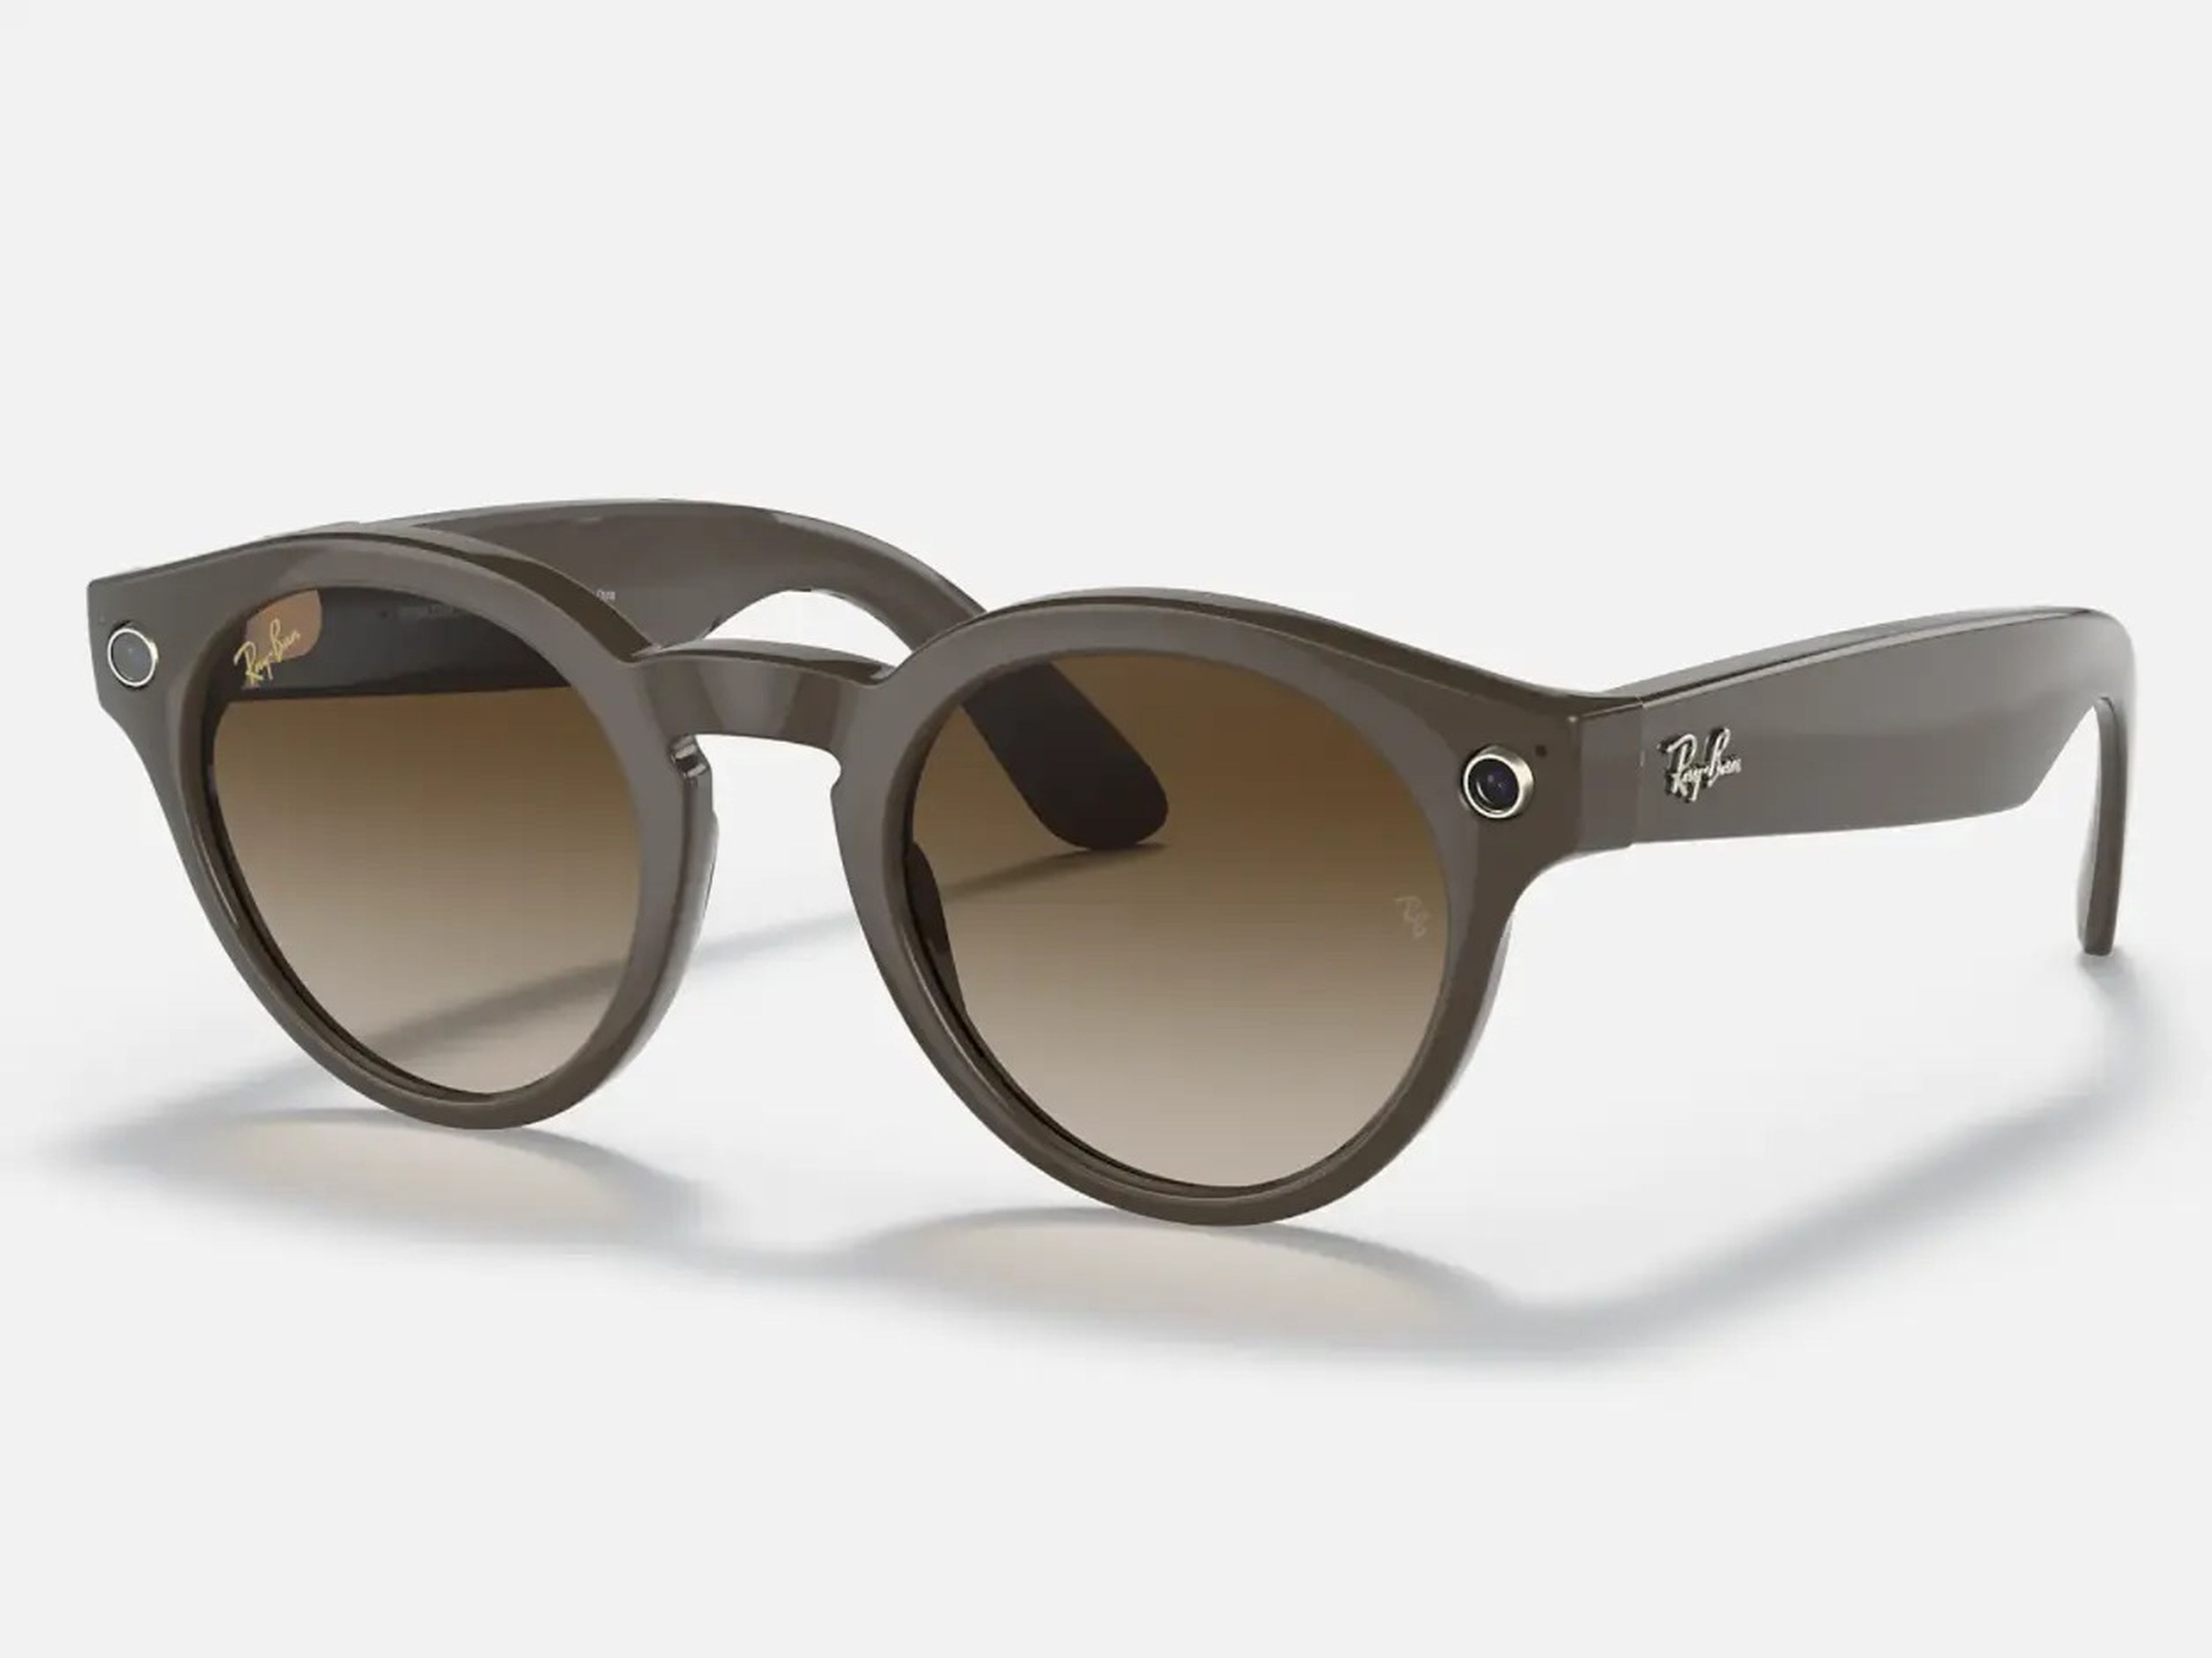 Facebook's Ray-Ban Stories smart glasses